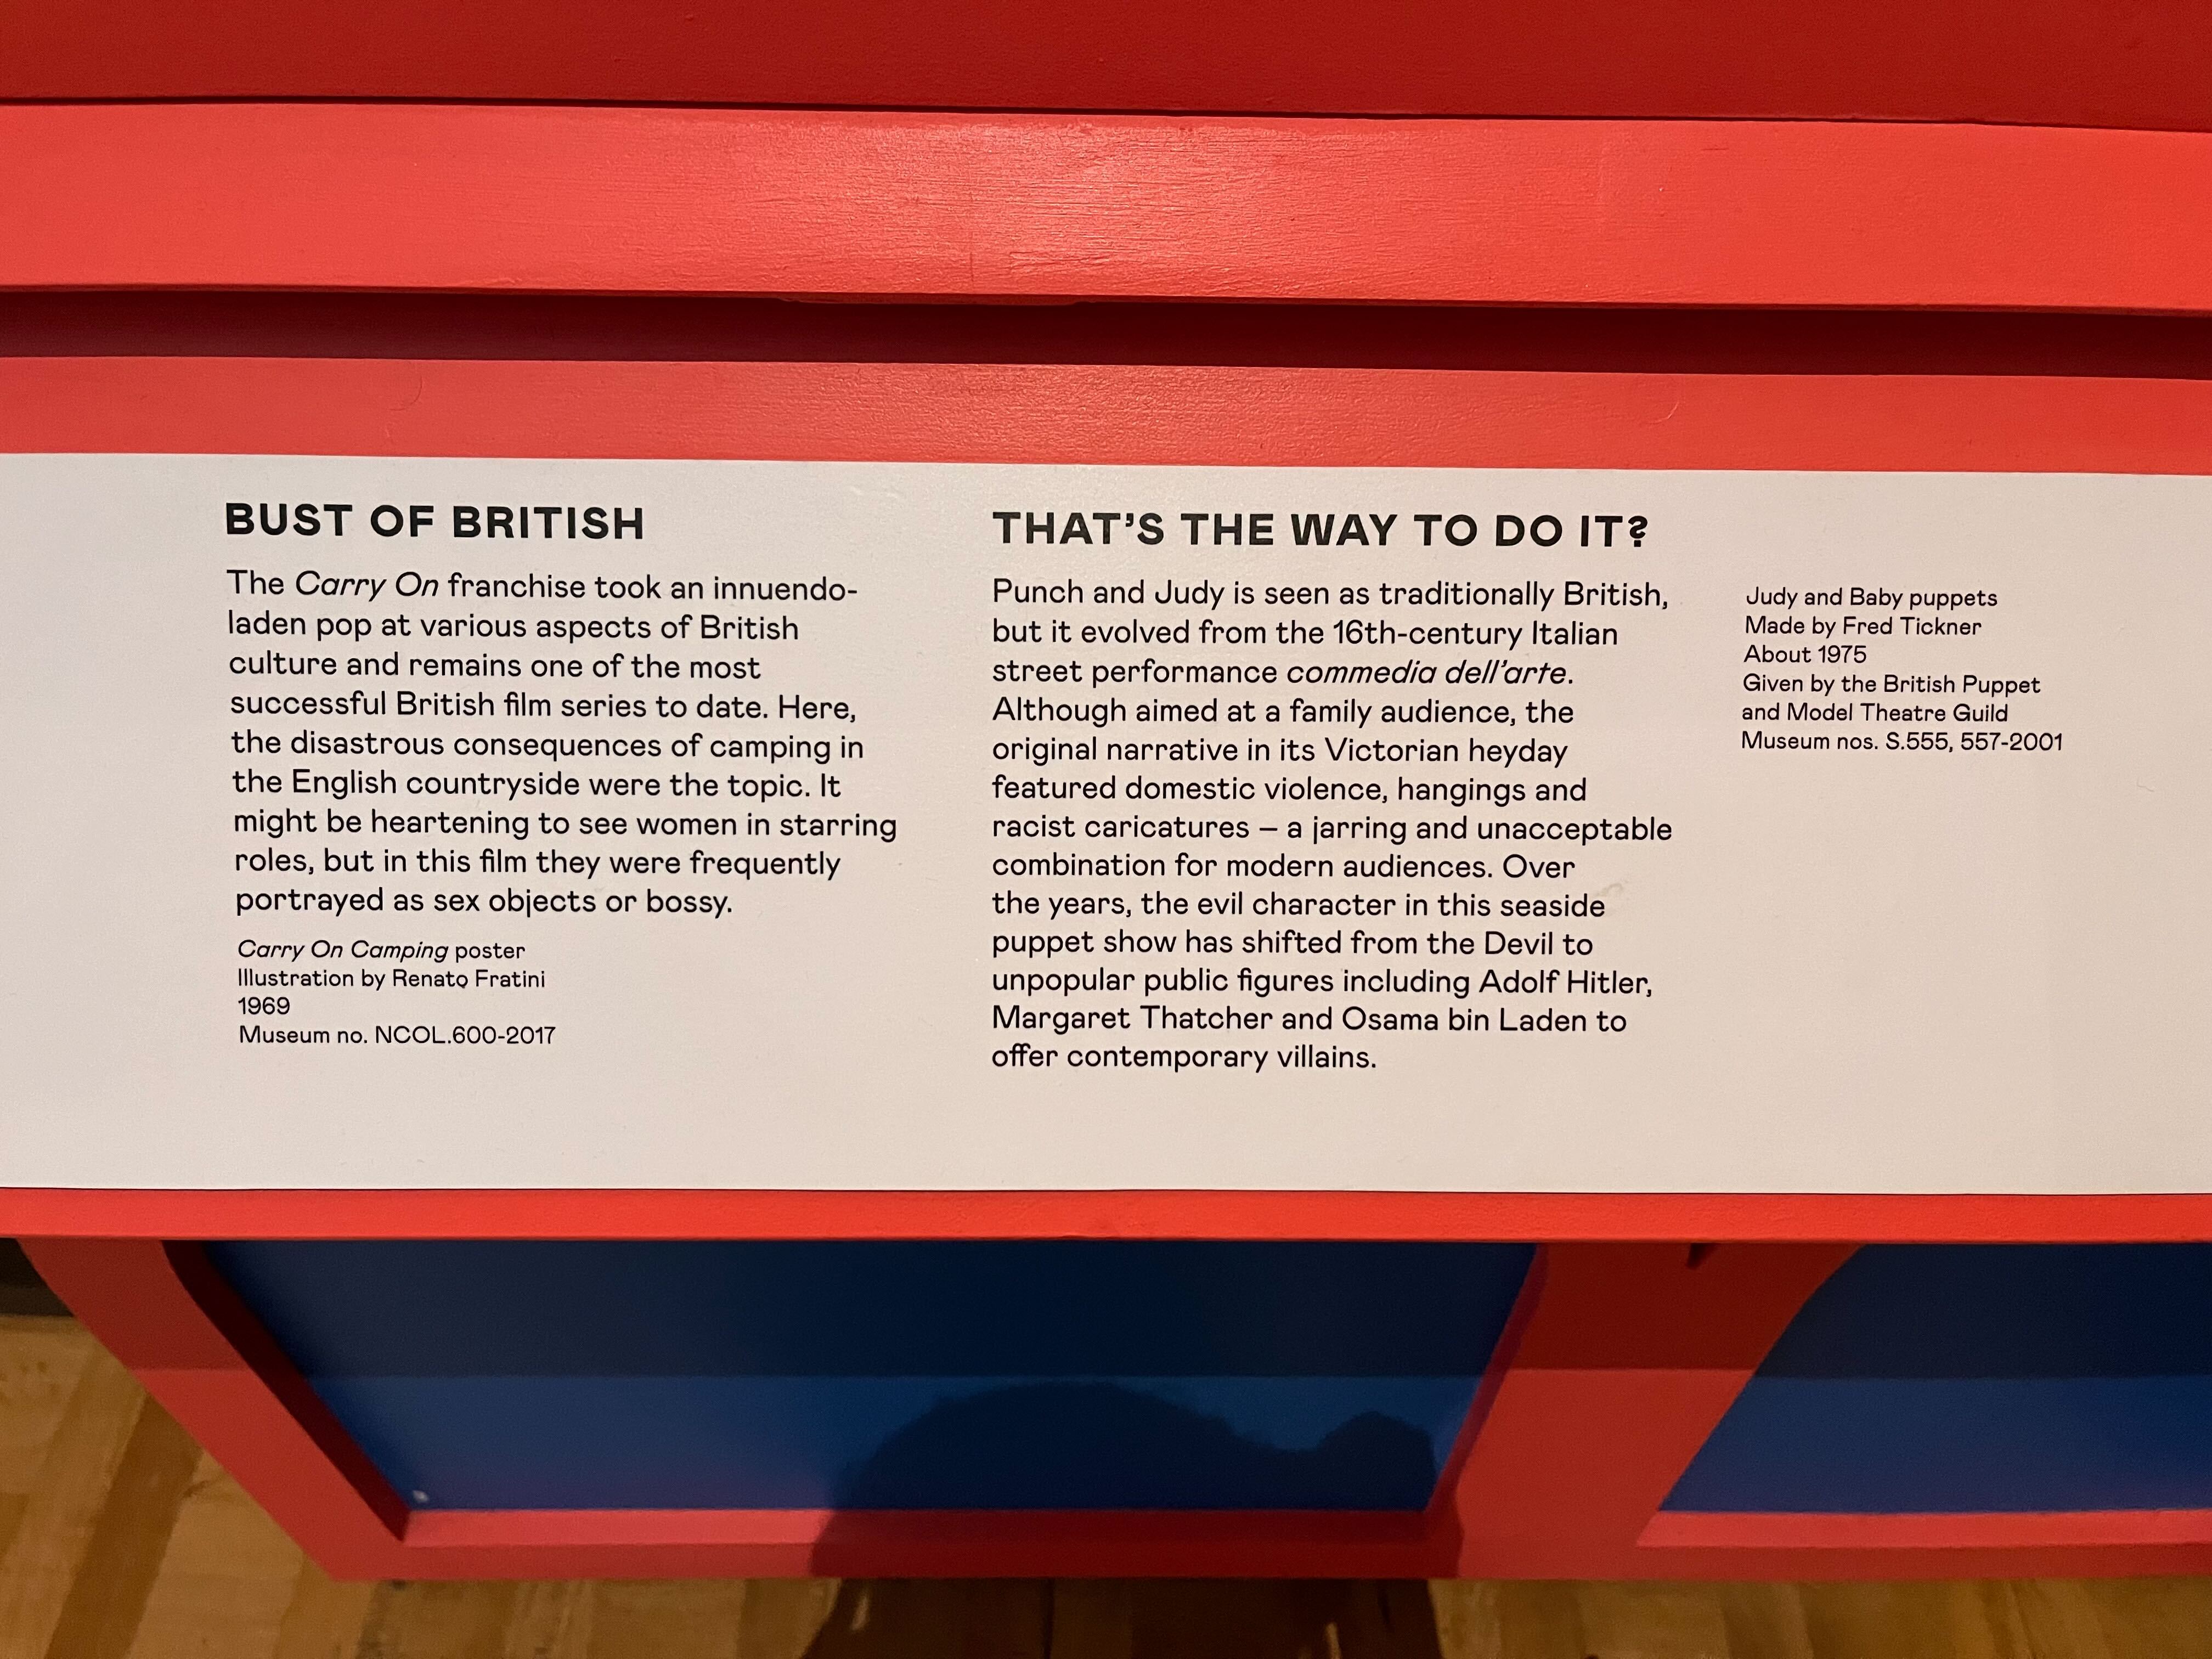 Text displays in the V&A exhibit mention Mrs Thatcher at the same time as Hitler and Bin Laden